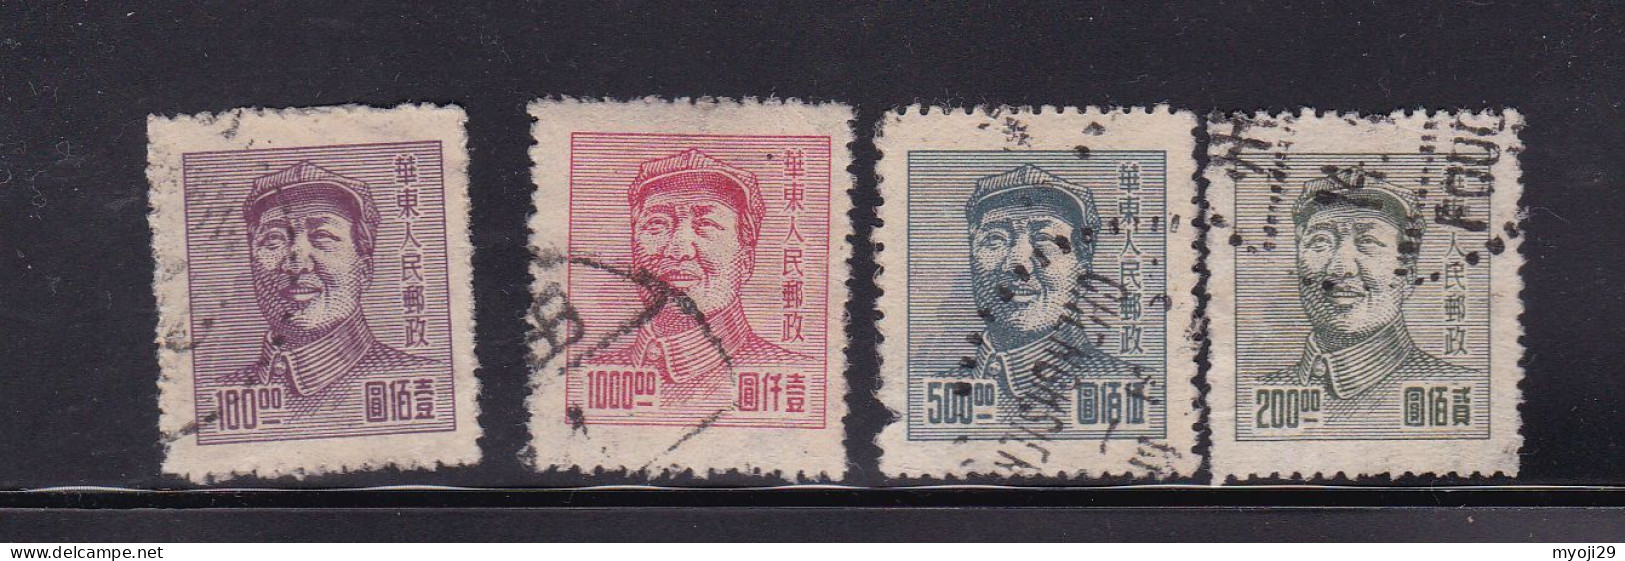 East China 1949 Mao Tse-tung $100,$200,$500,$1000 Used Stamps - Oblitérés